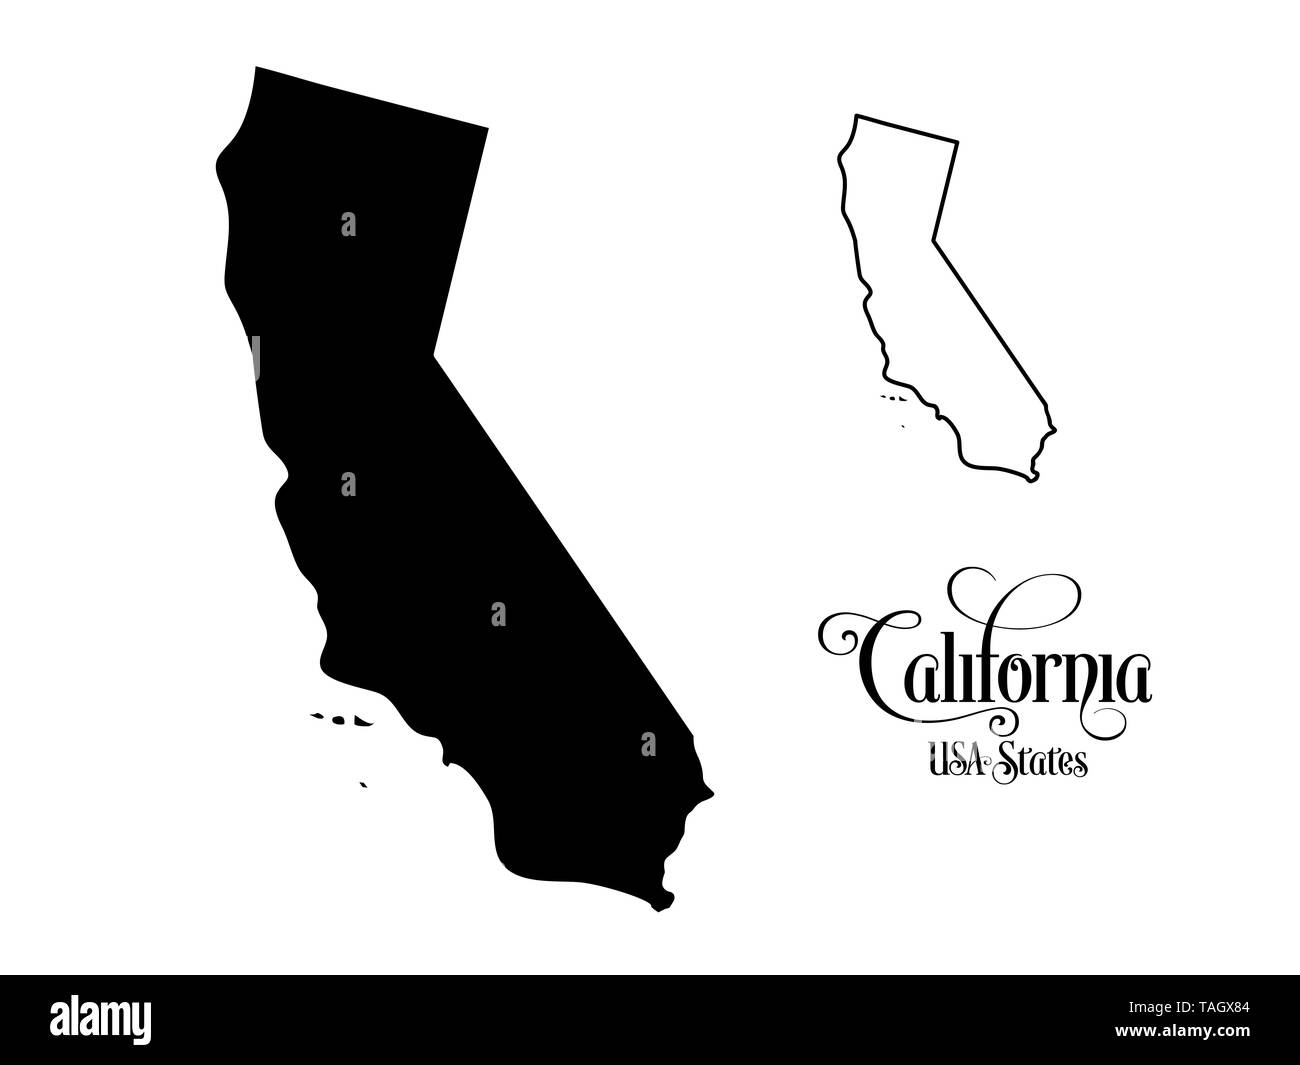 Map of The United States of America (USA) State of California - Illustration on White Background. Stock Photo